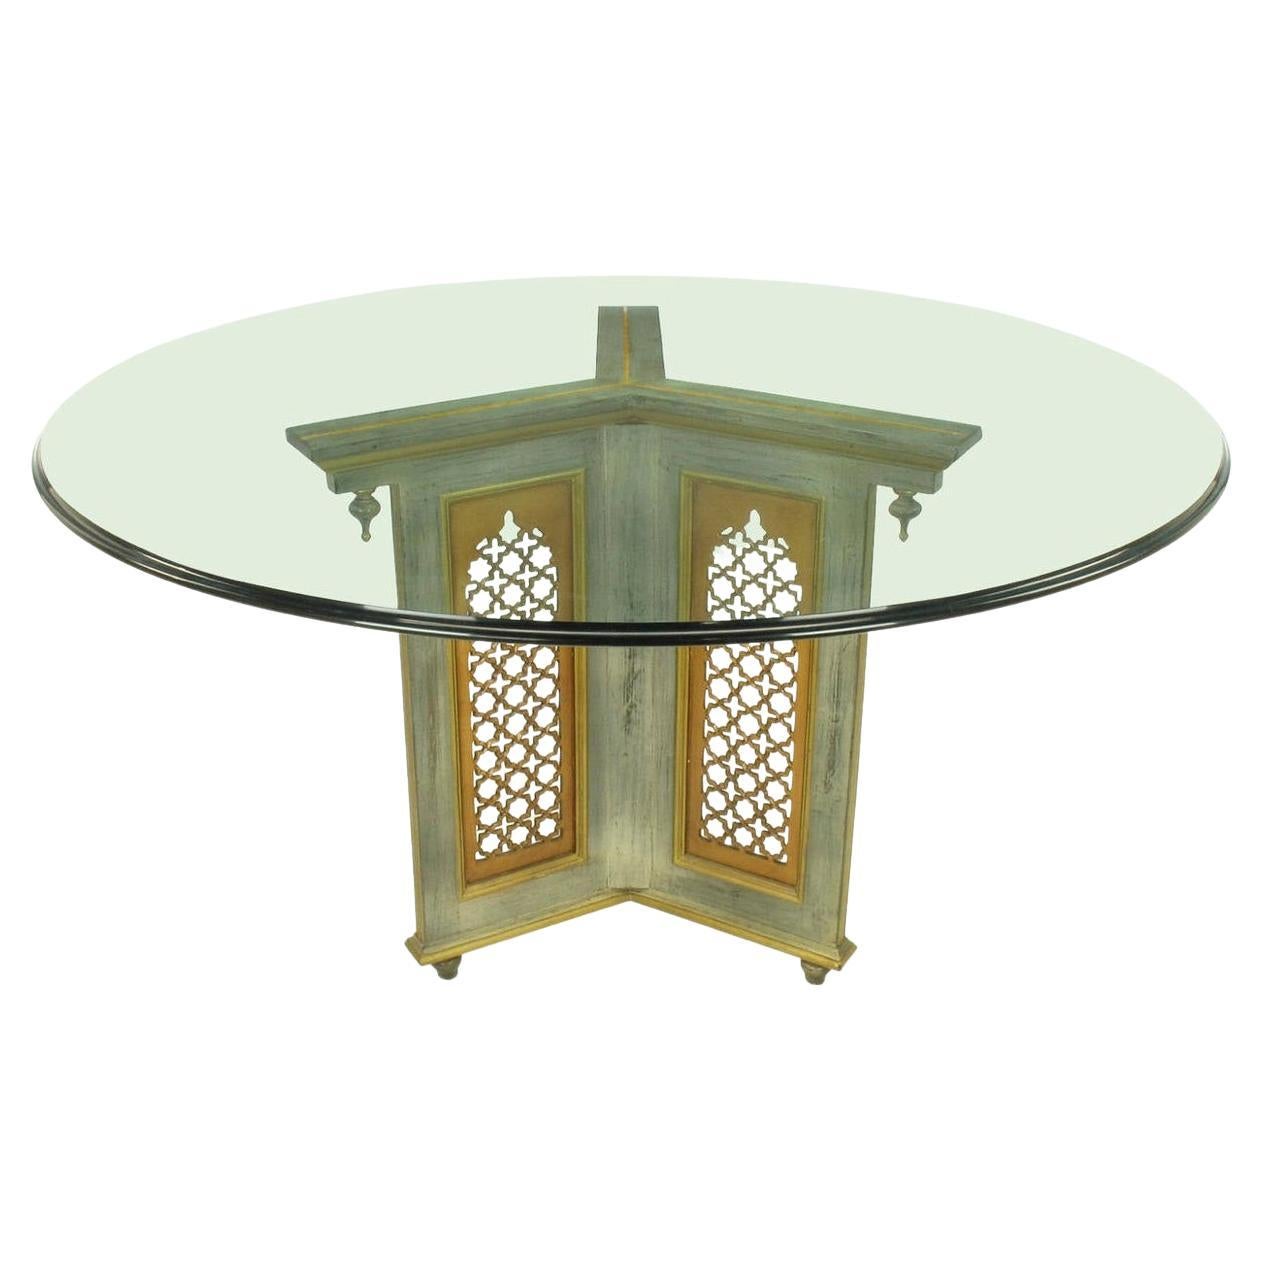 Verdigris Finish Pedestal Dining Table with Gilt Arabeque Panels For Sale